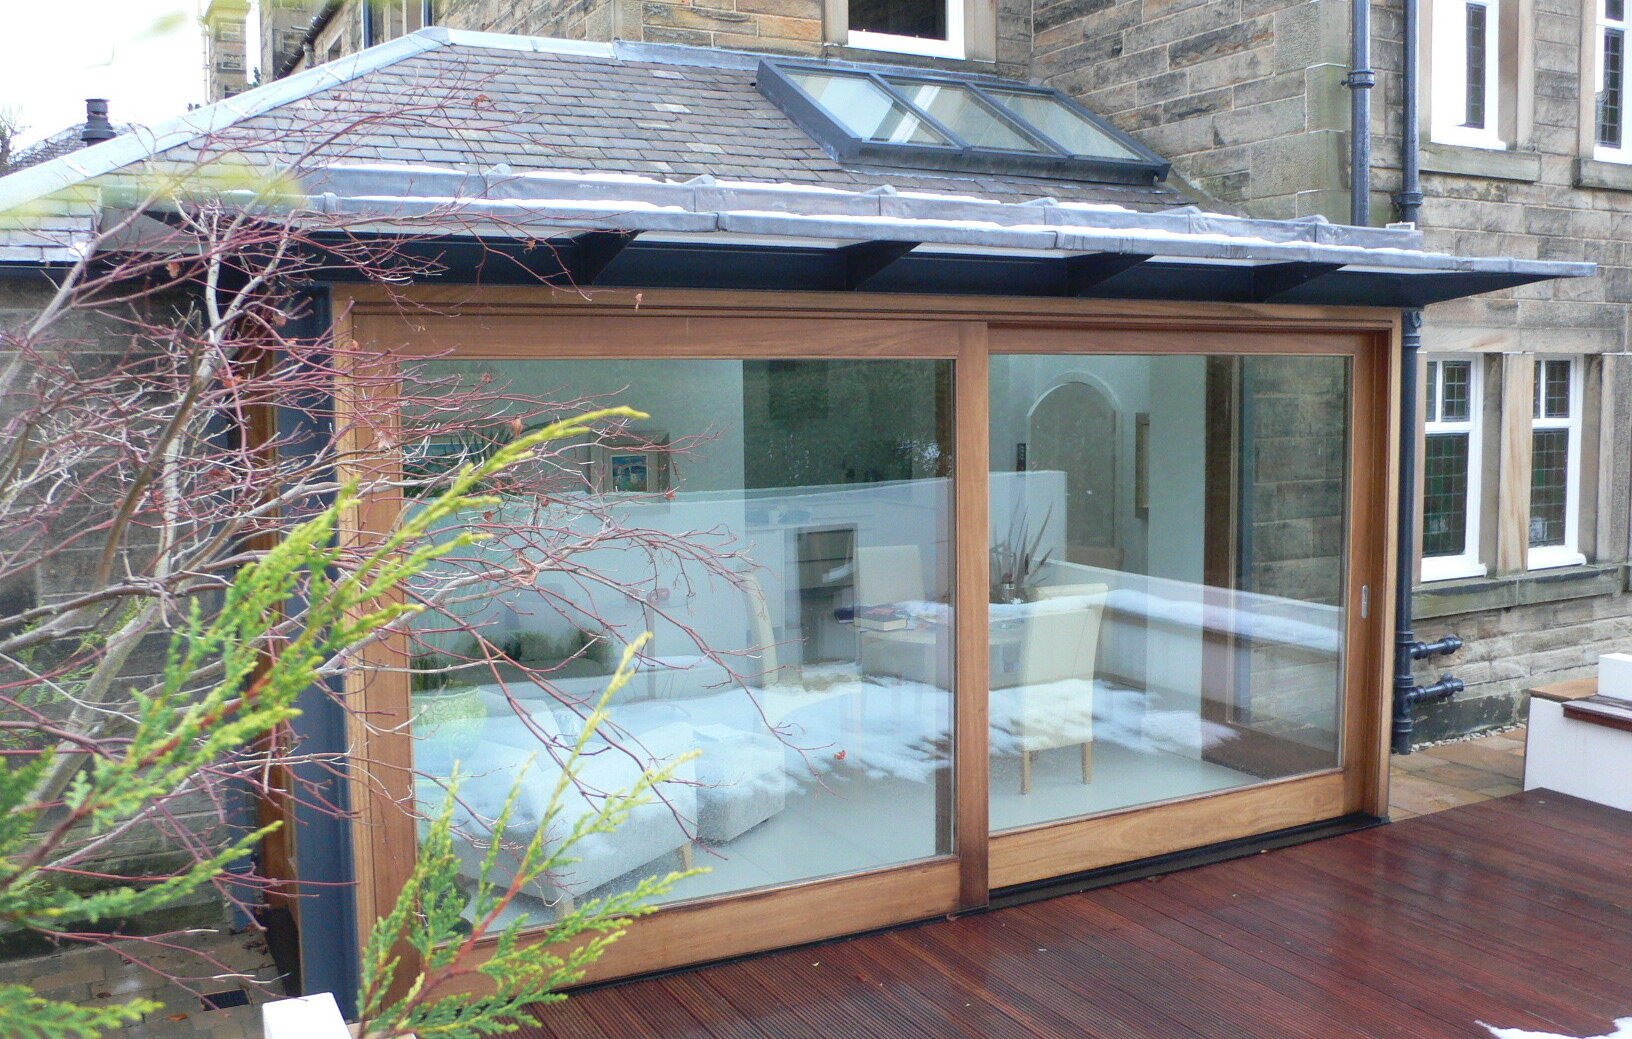  The existing outbuilding was transformed by the addition of a contemporary ‘bay window’ extension. 